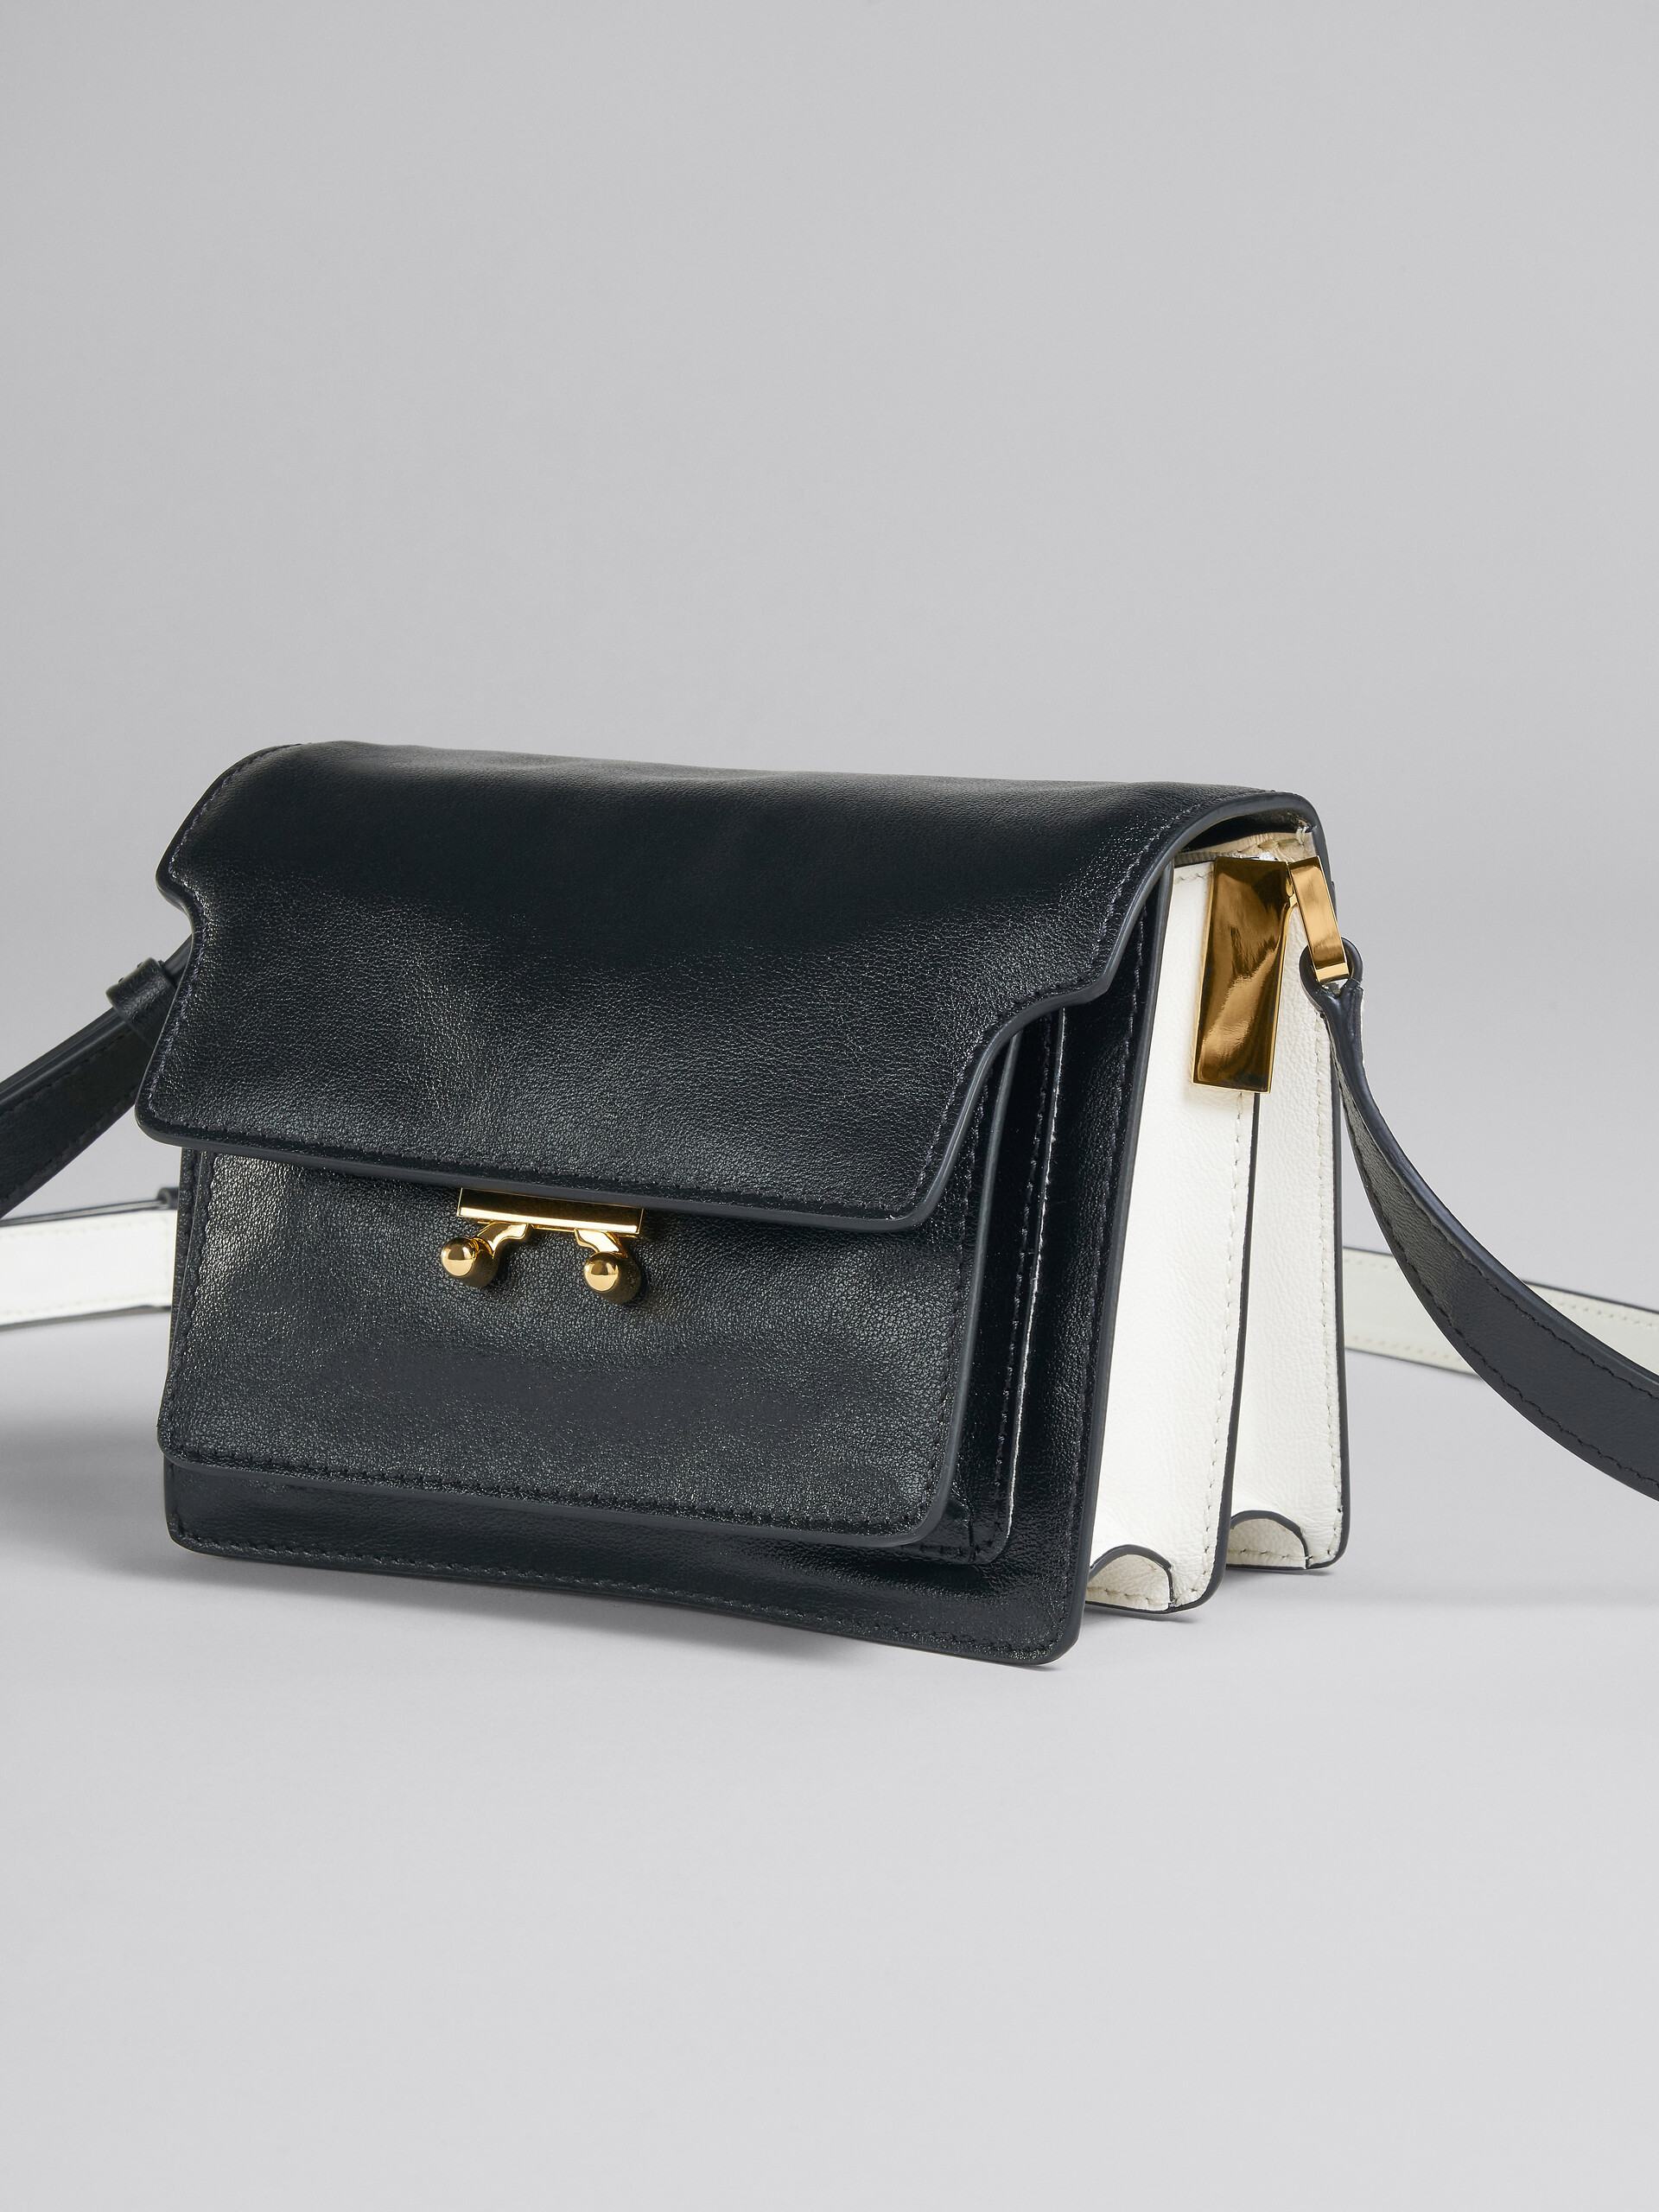 Marni Trunk Soft Mini Bag in Black/White Curated at Jake and Jones